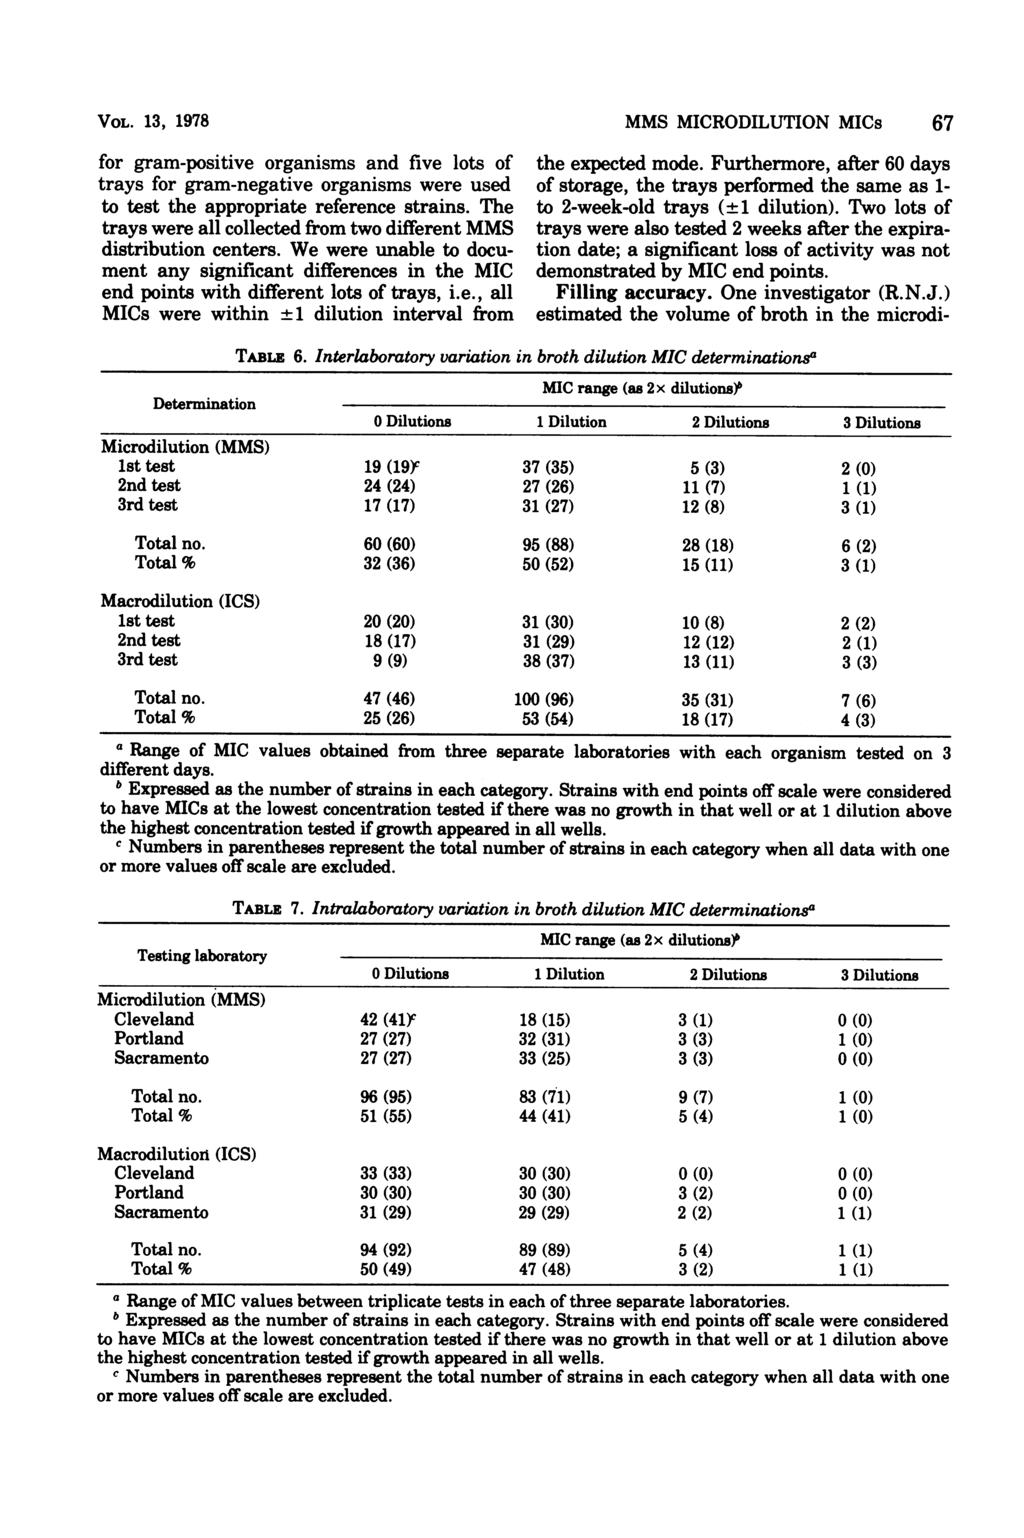 VOL. 13, 1978 for gram-positive organisms and five lots of trays for gram-negative organisms were used to test the appropriate reference strains.